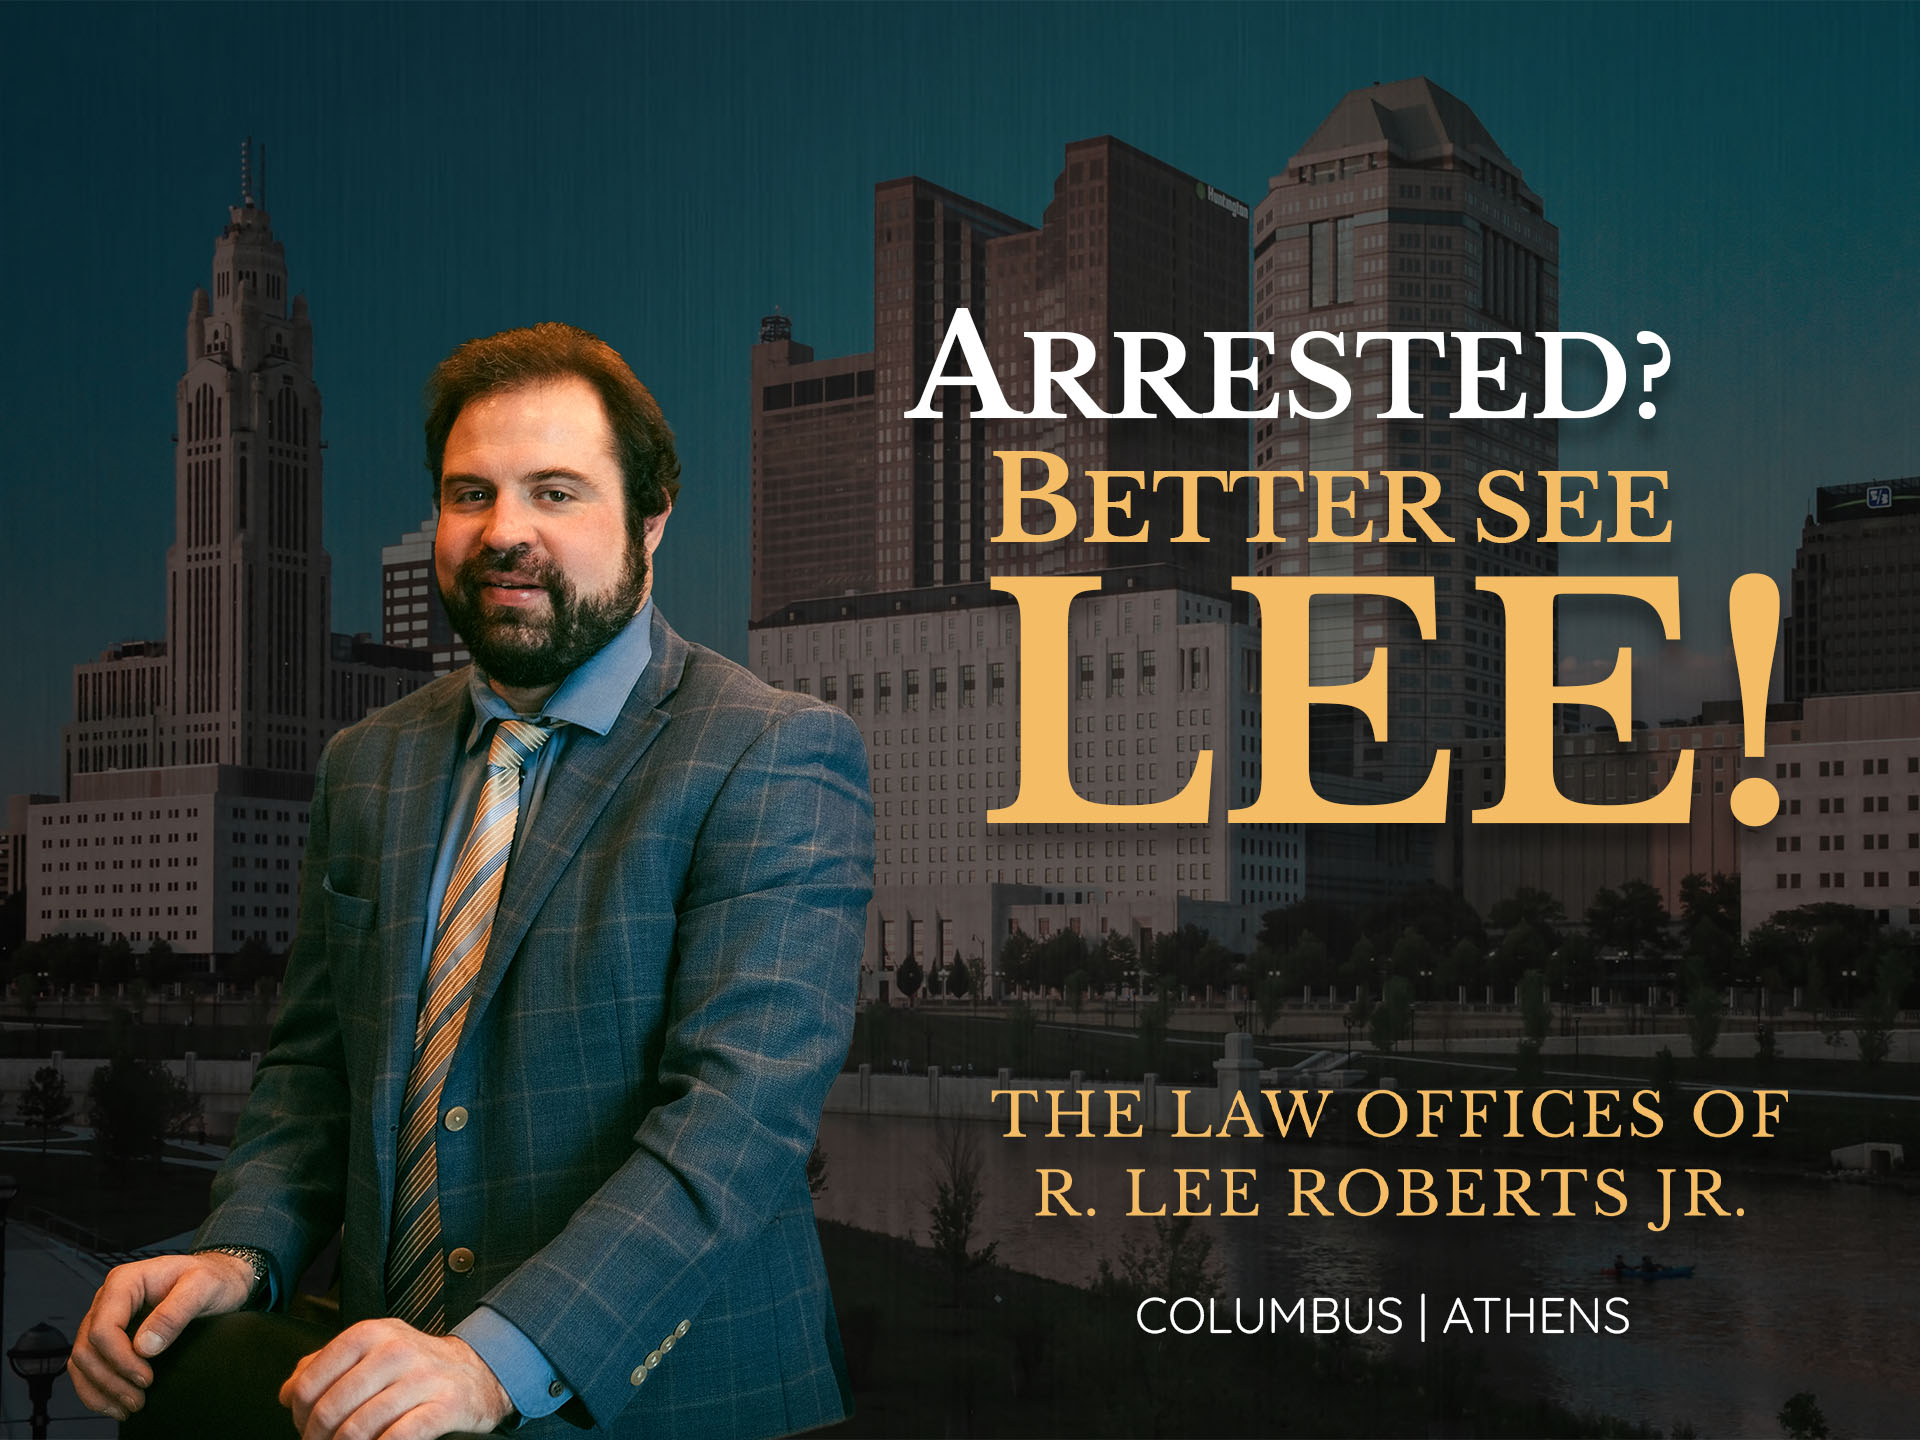 Law Offices of R. Lee Roberts Jr.